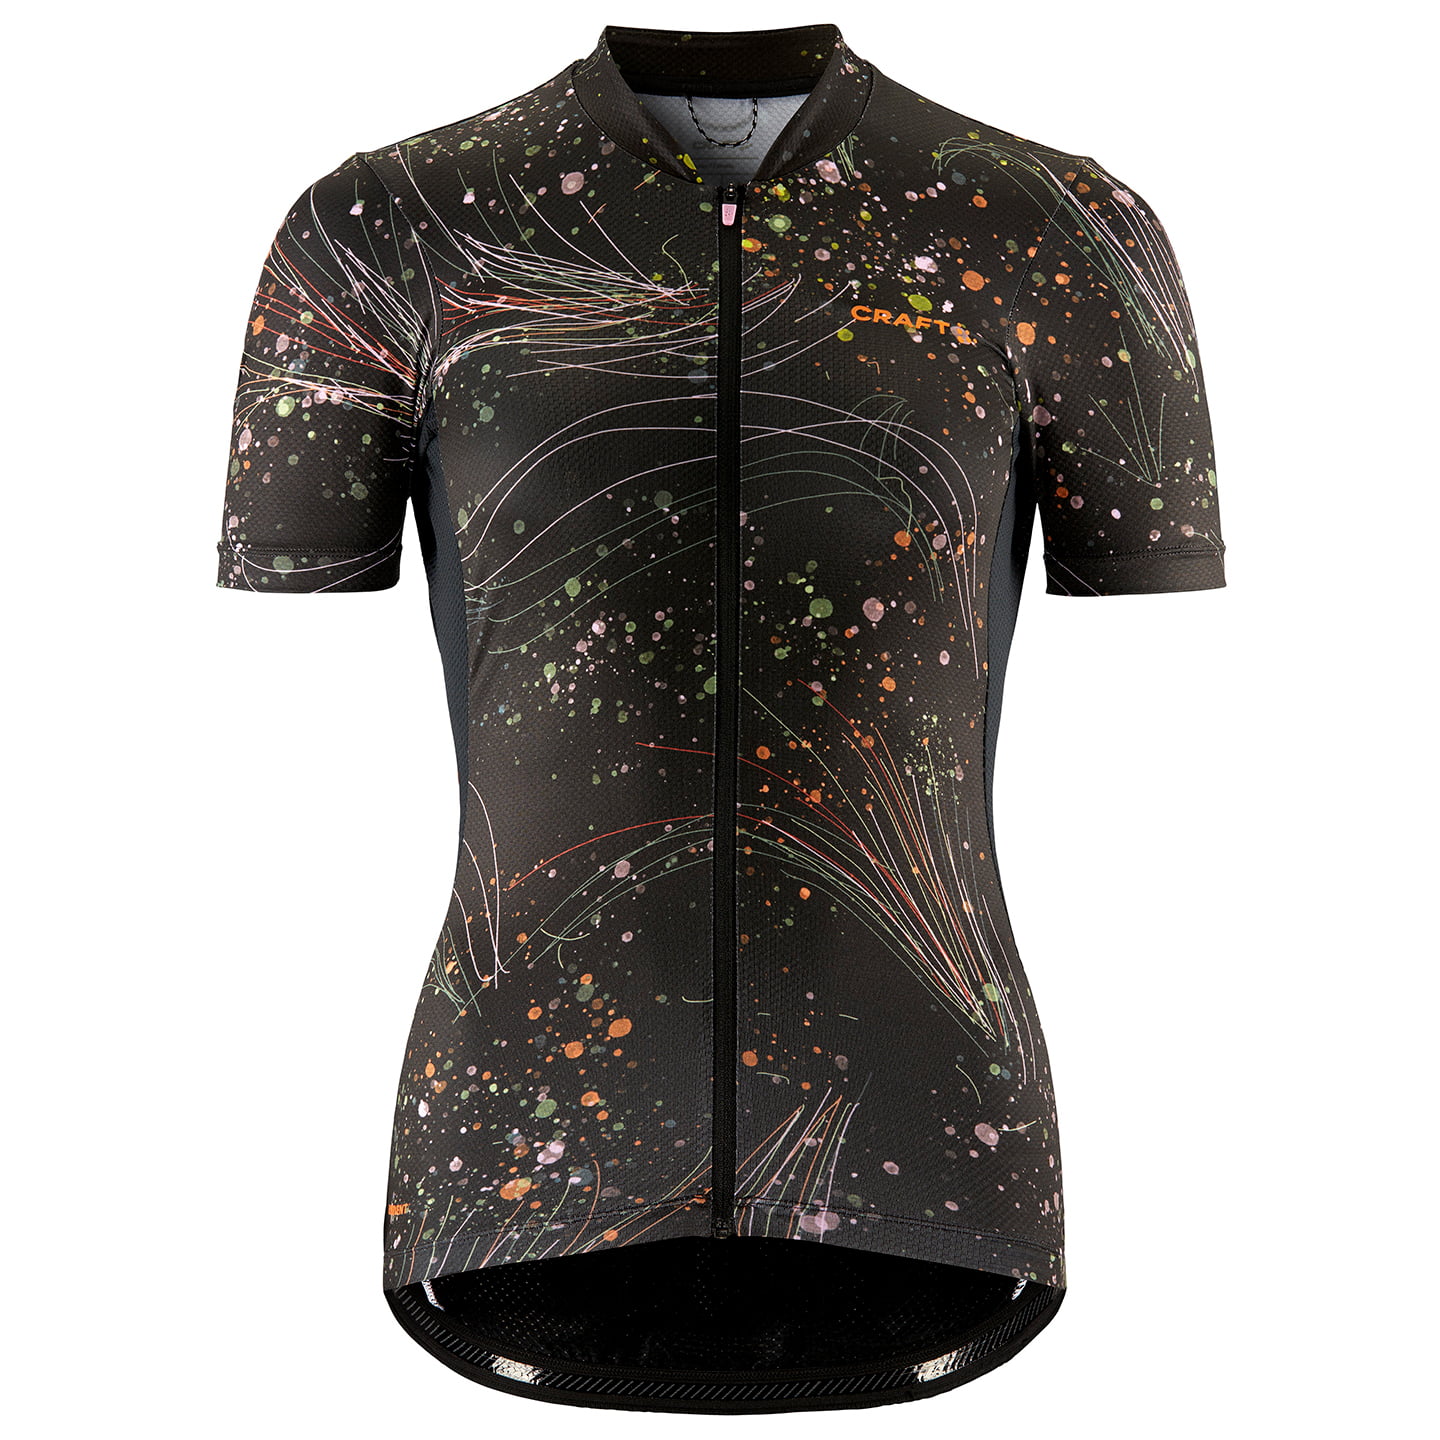 CRAFT ADV Endurance Graphic Women’s Short Sleeve Jersey, size S, Cycling jersey, Cycle gear